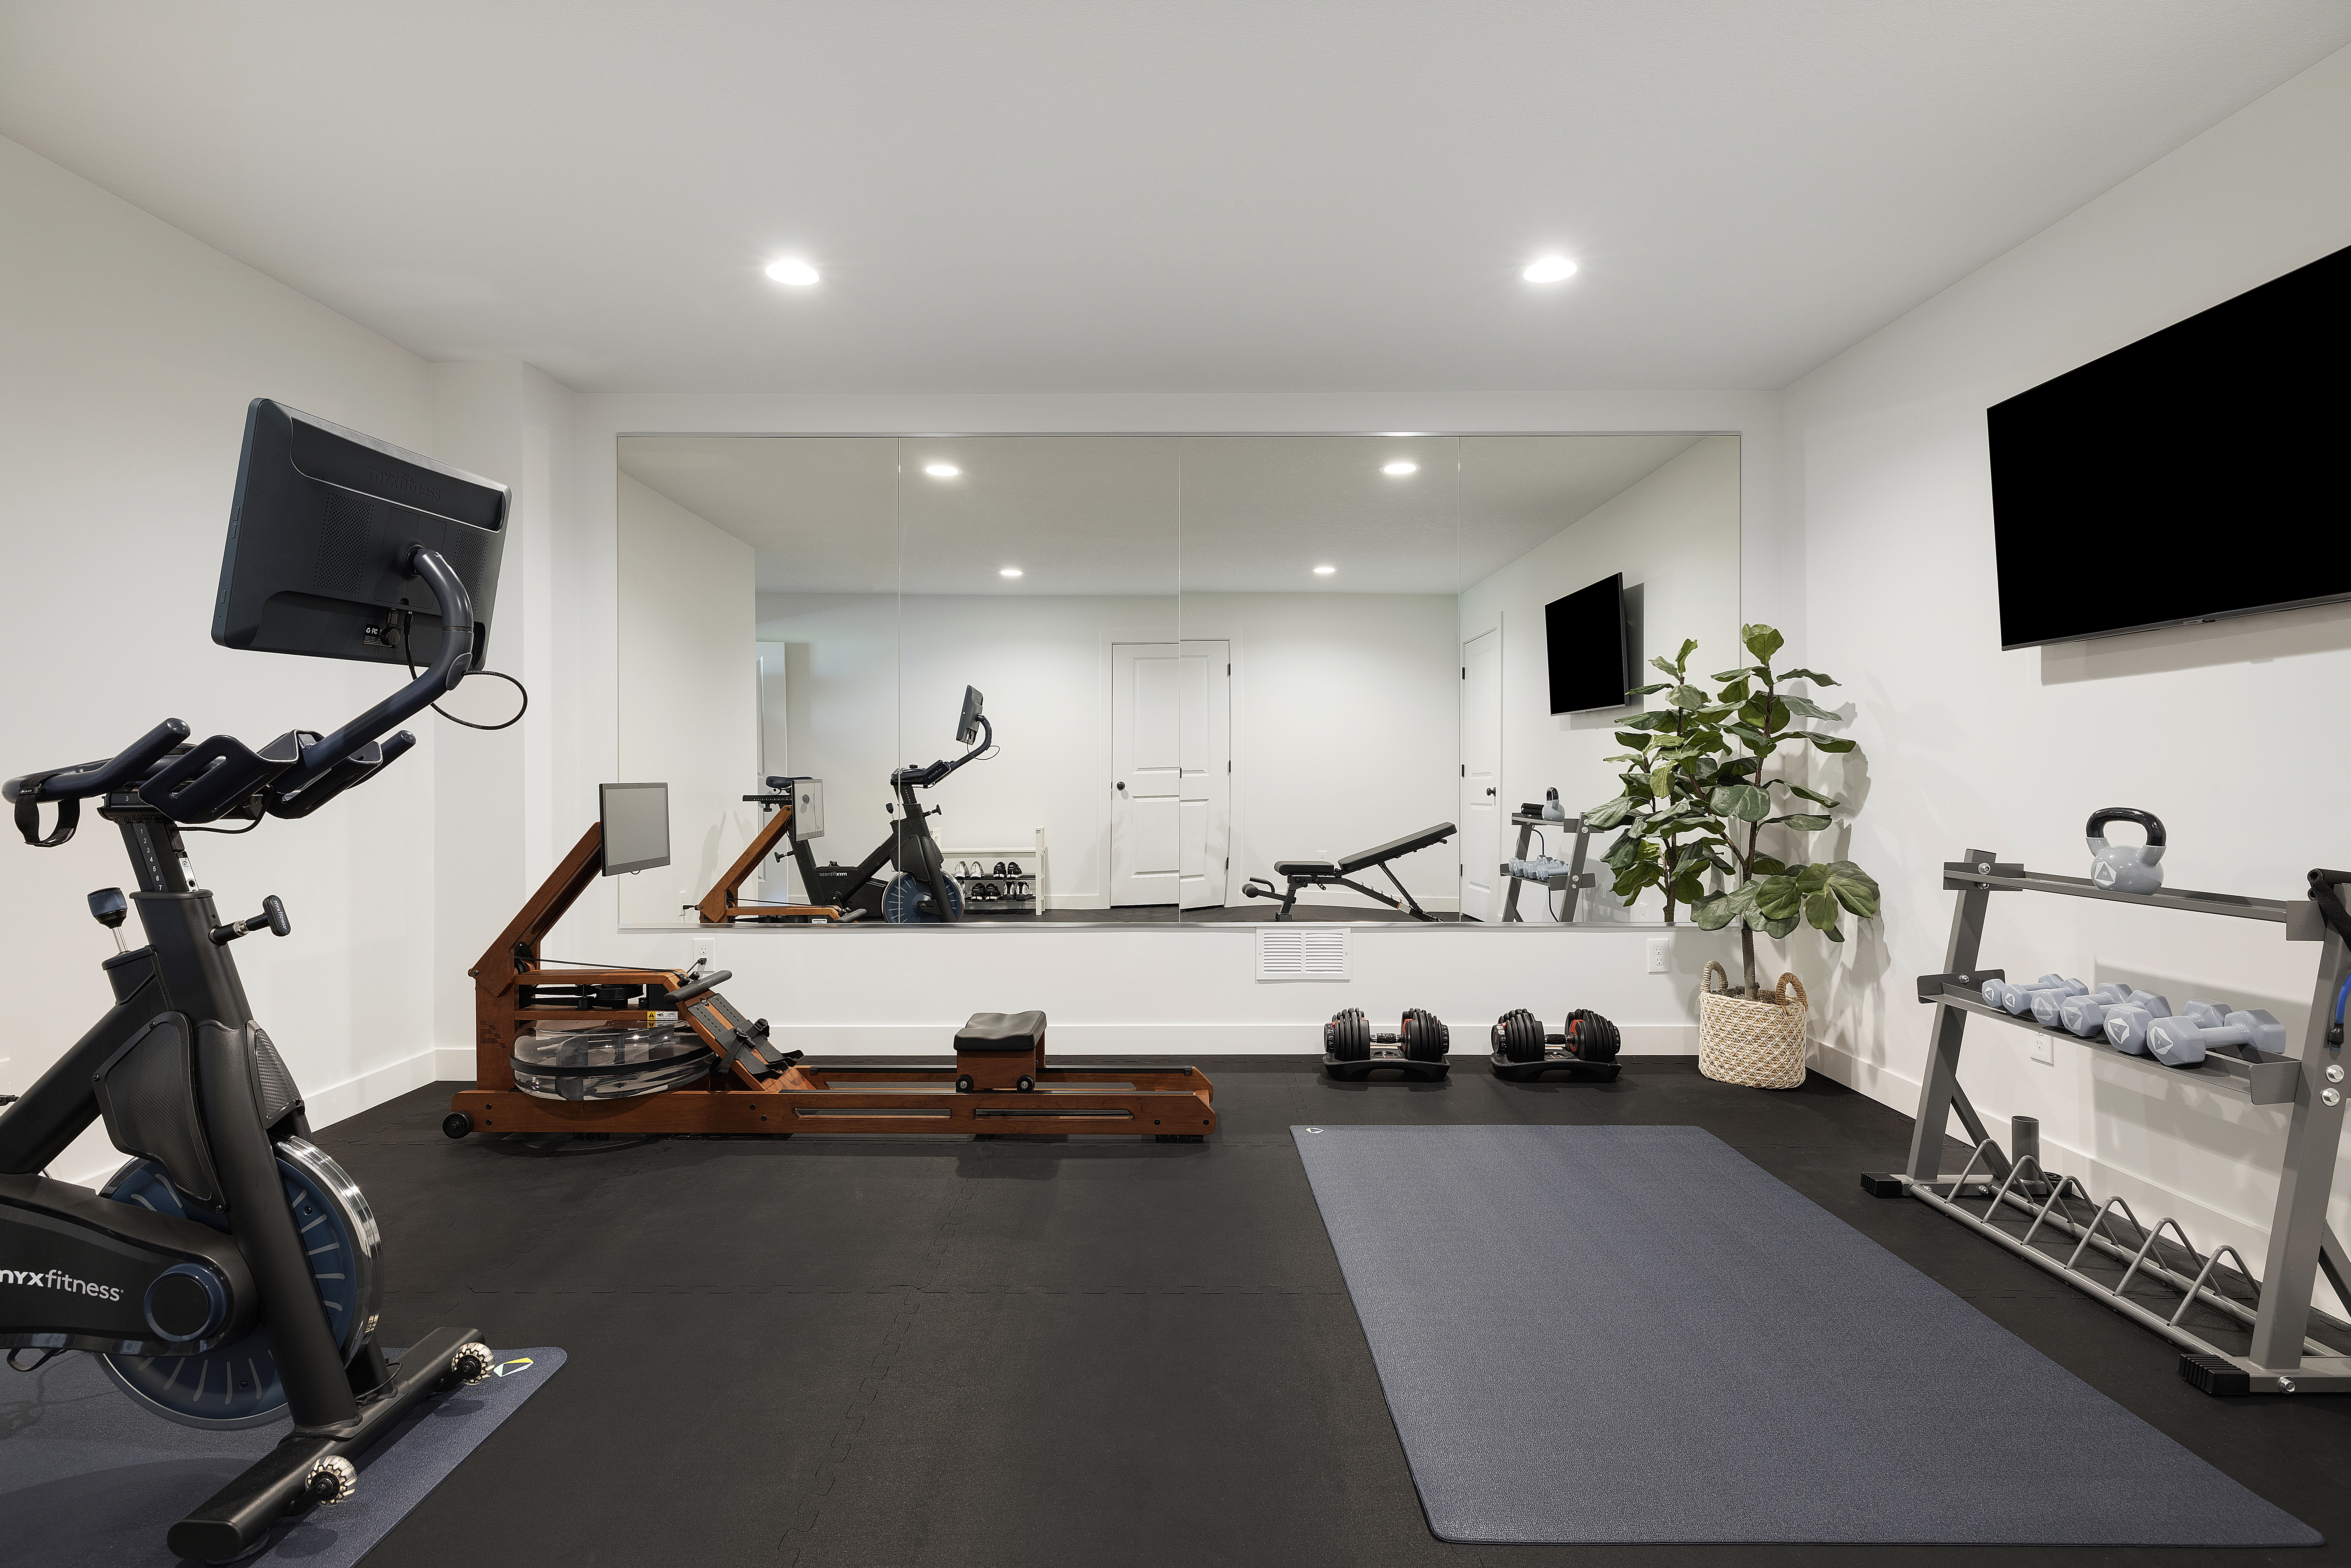 The Styled Press Gym | St.Michael, MN 2